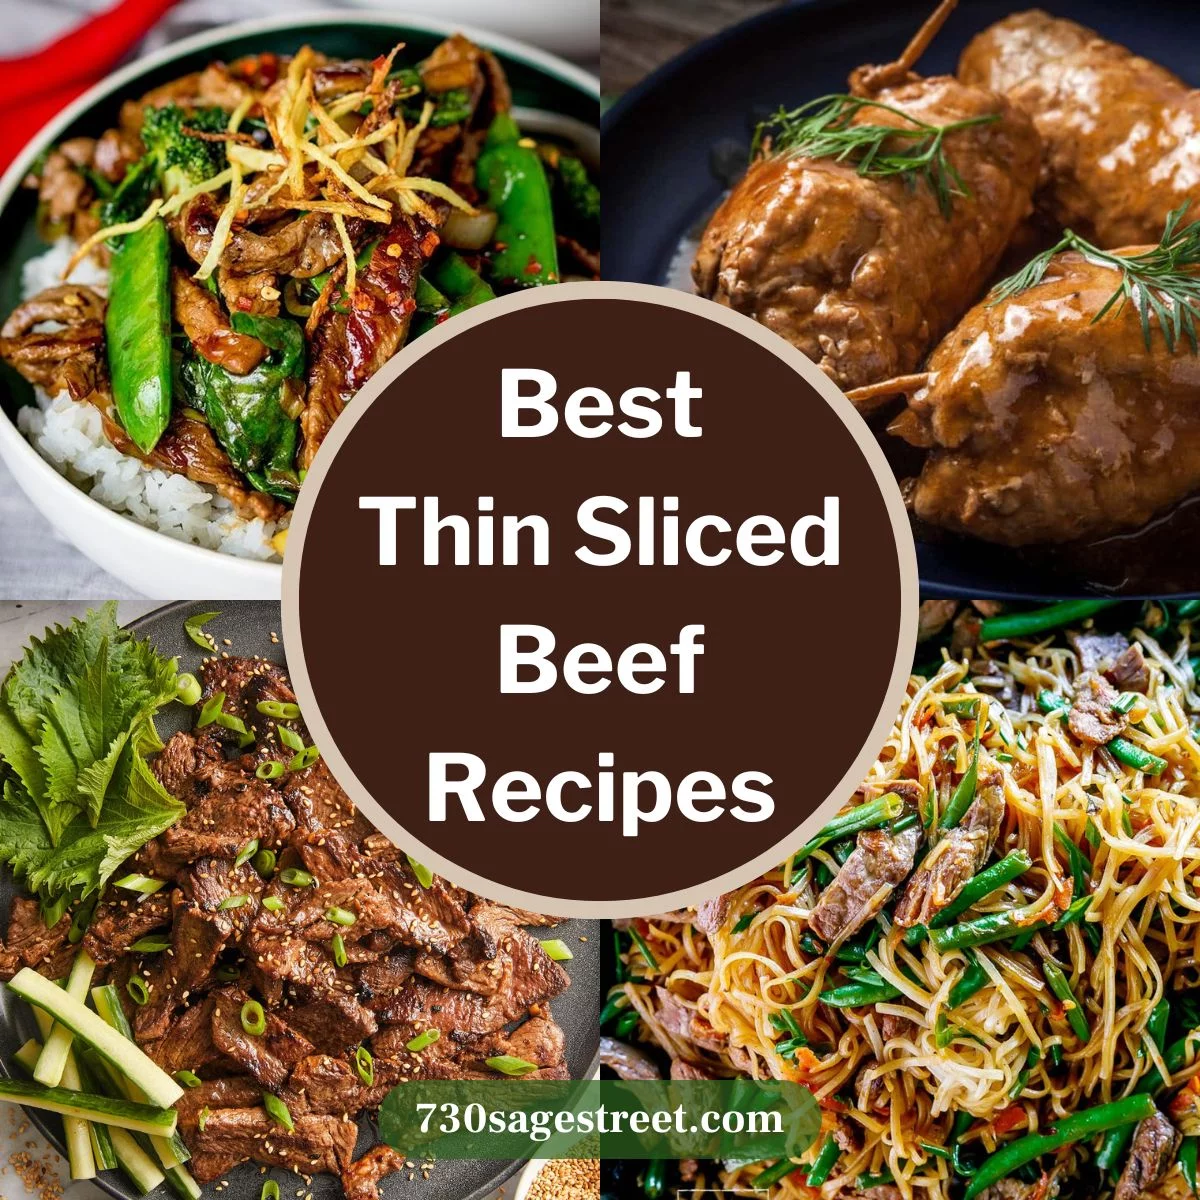 Best Thin Sliced Beef Recipes